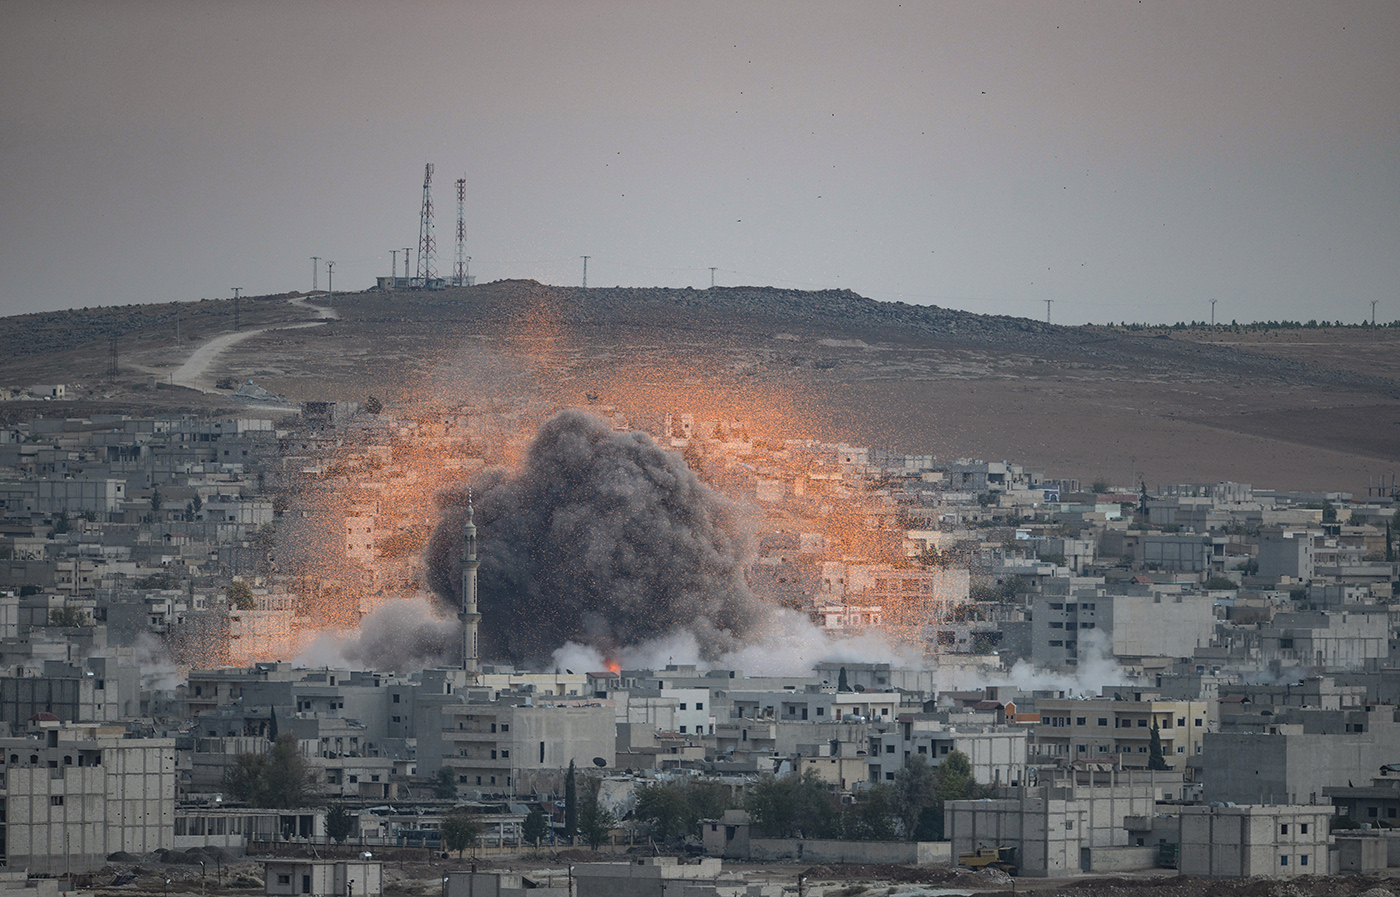 An explosion after an apparent US-led coalition airstrike on Kobane, Syria, as seen from the Turkish side of the border, near Suruc district, Sanliurfa, Turkey, 18 October 2014.